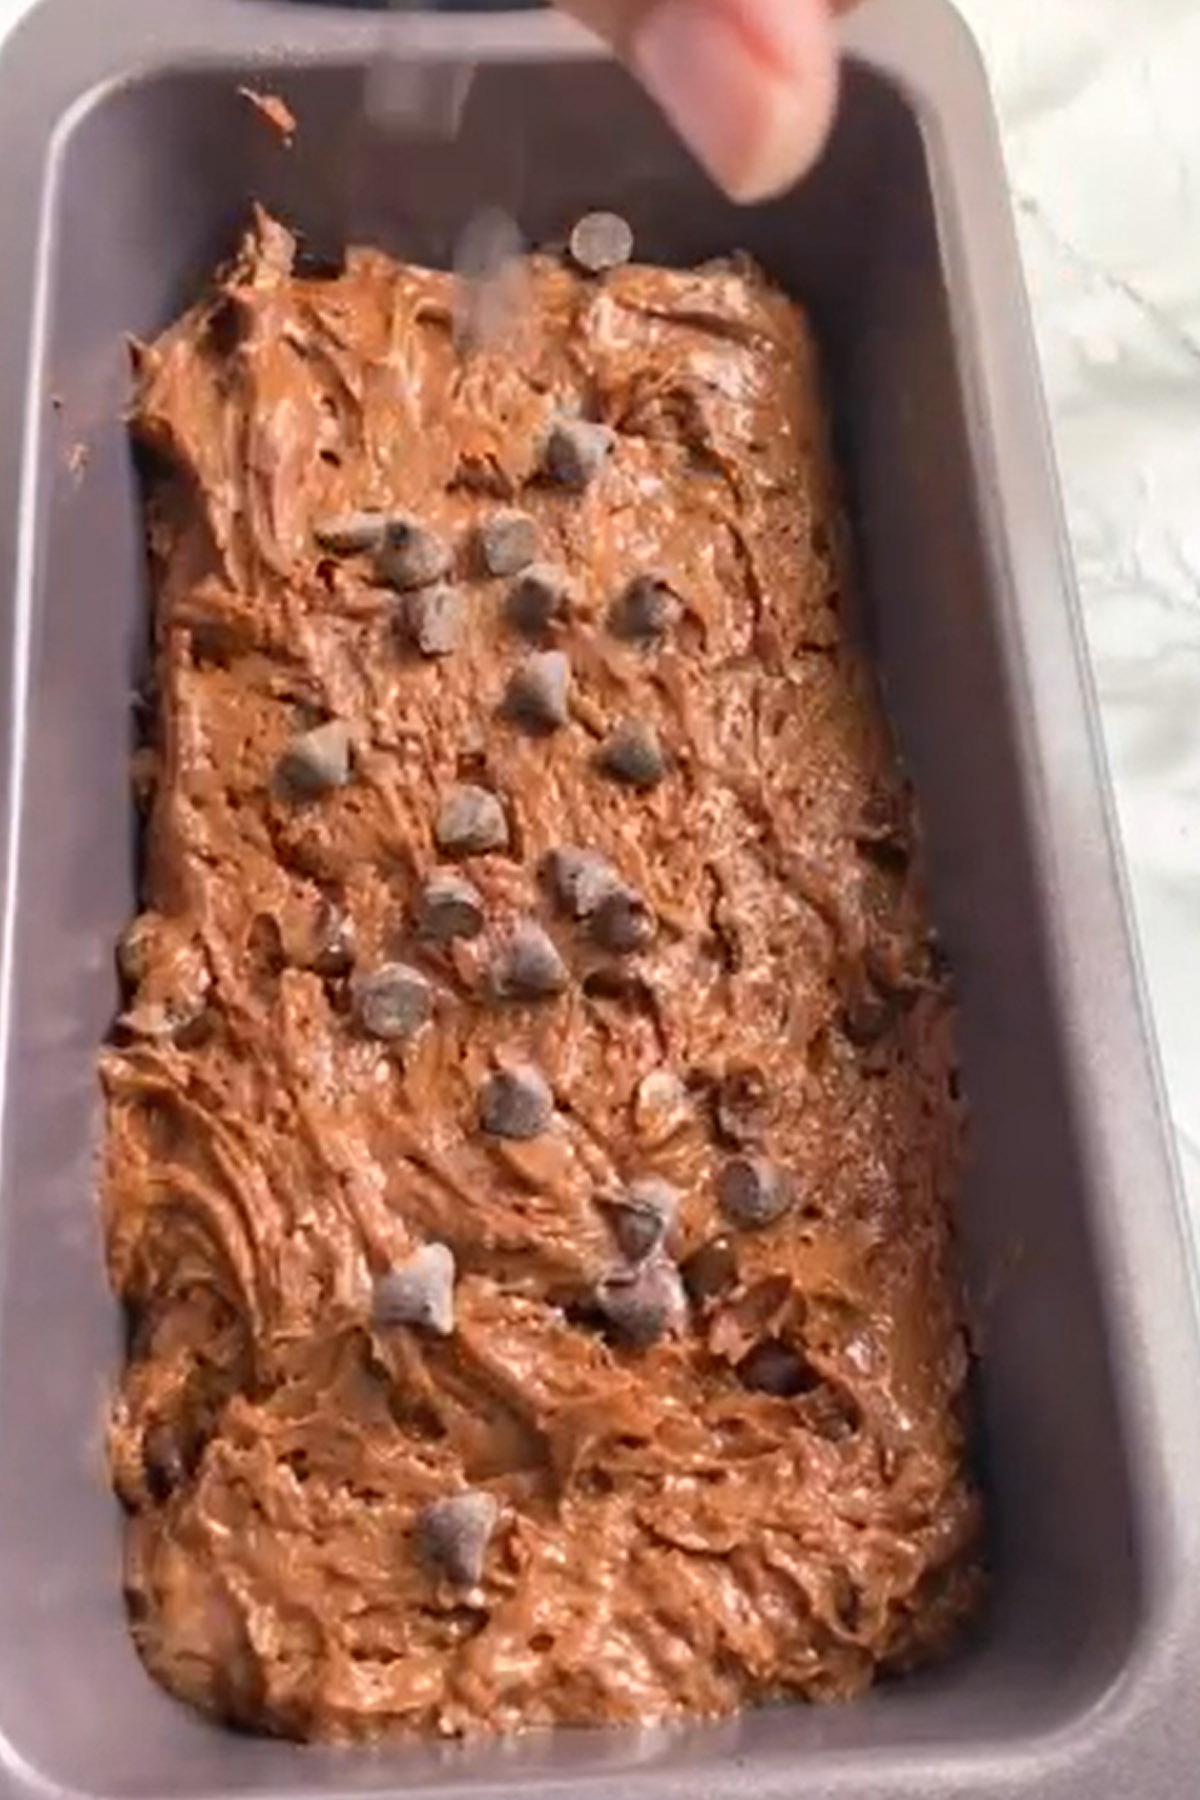 Chocolate chips are added on top of cake batter in a loaf pan.